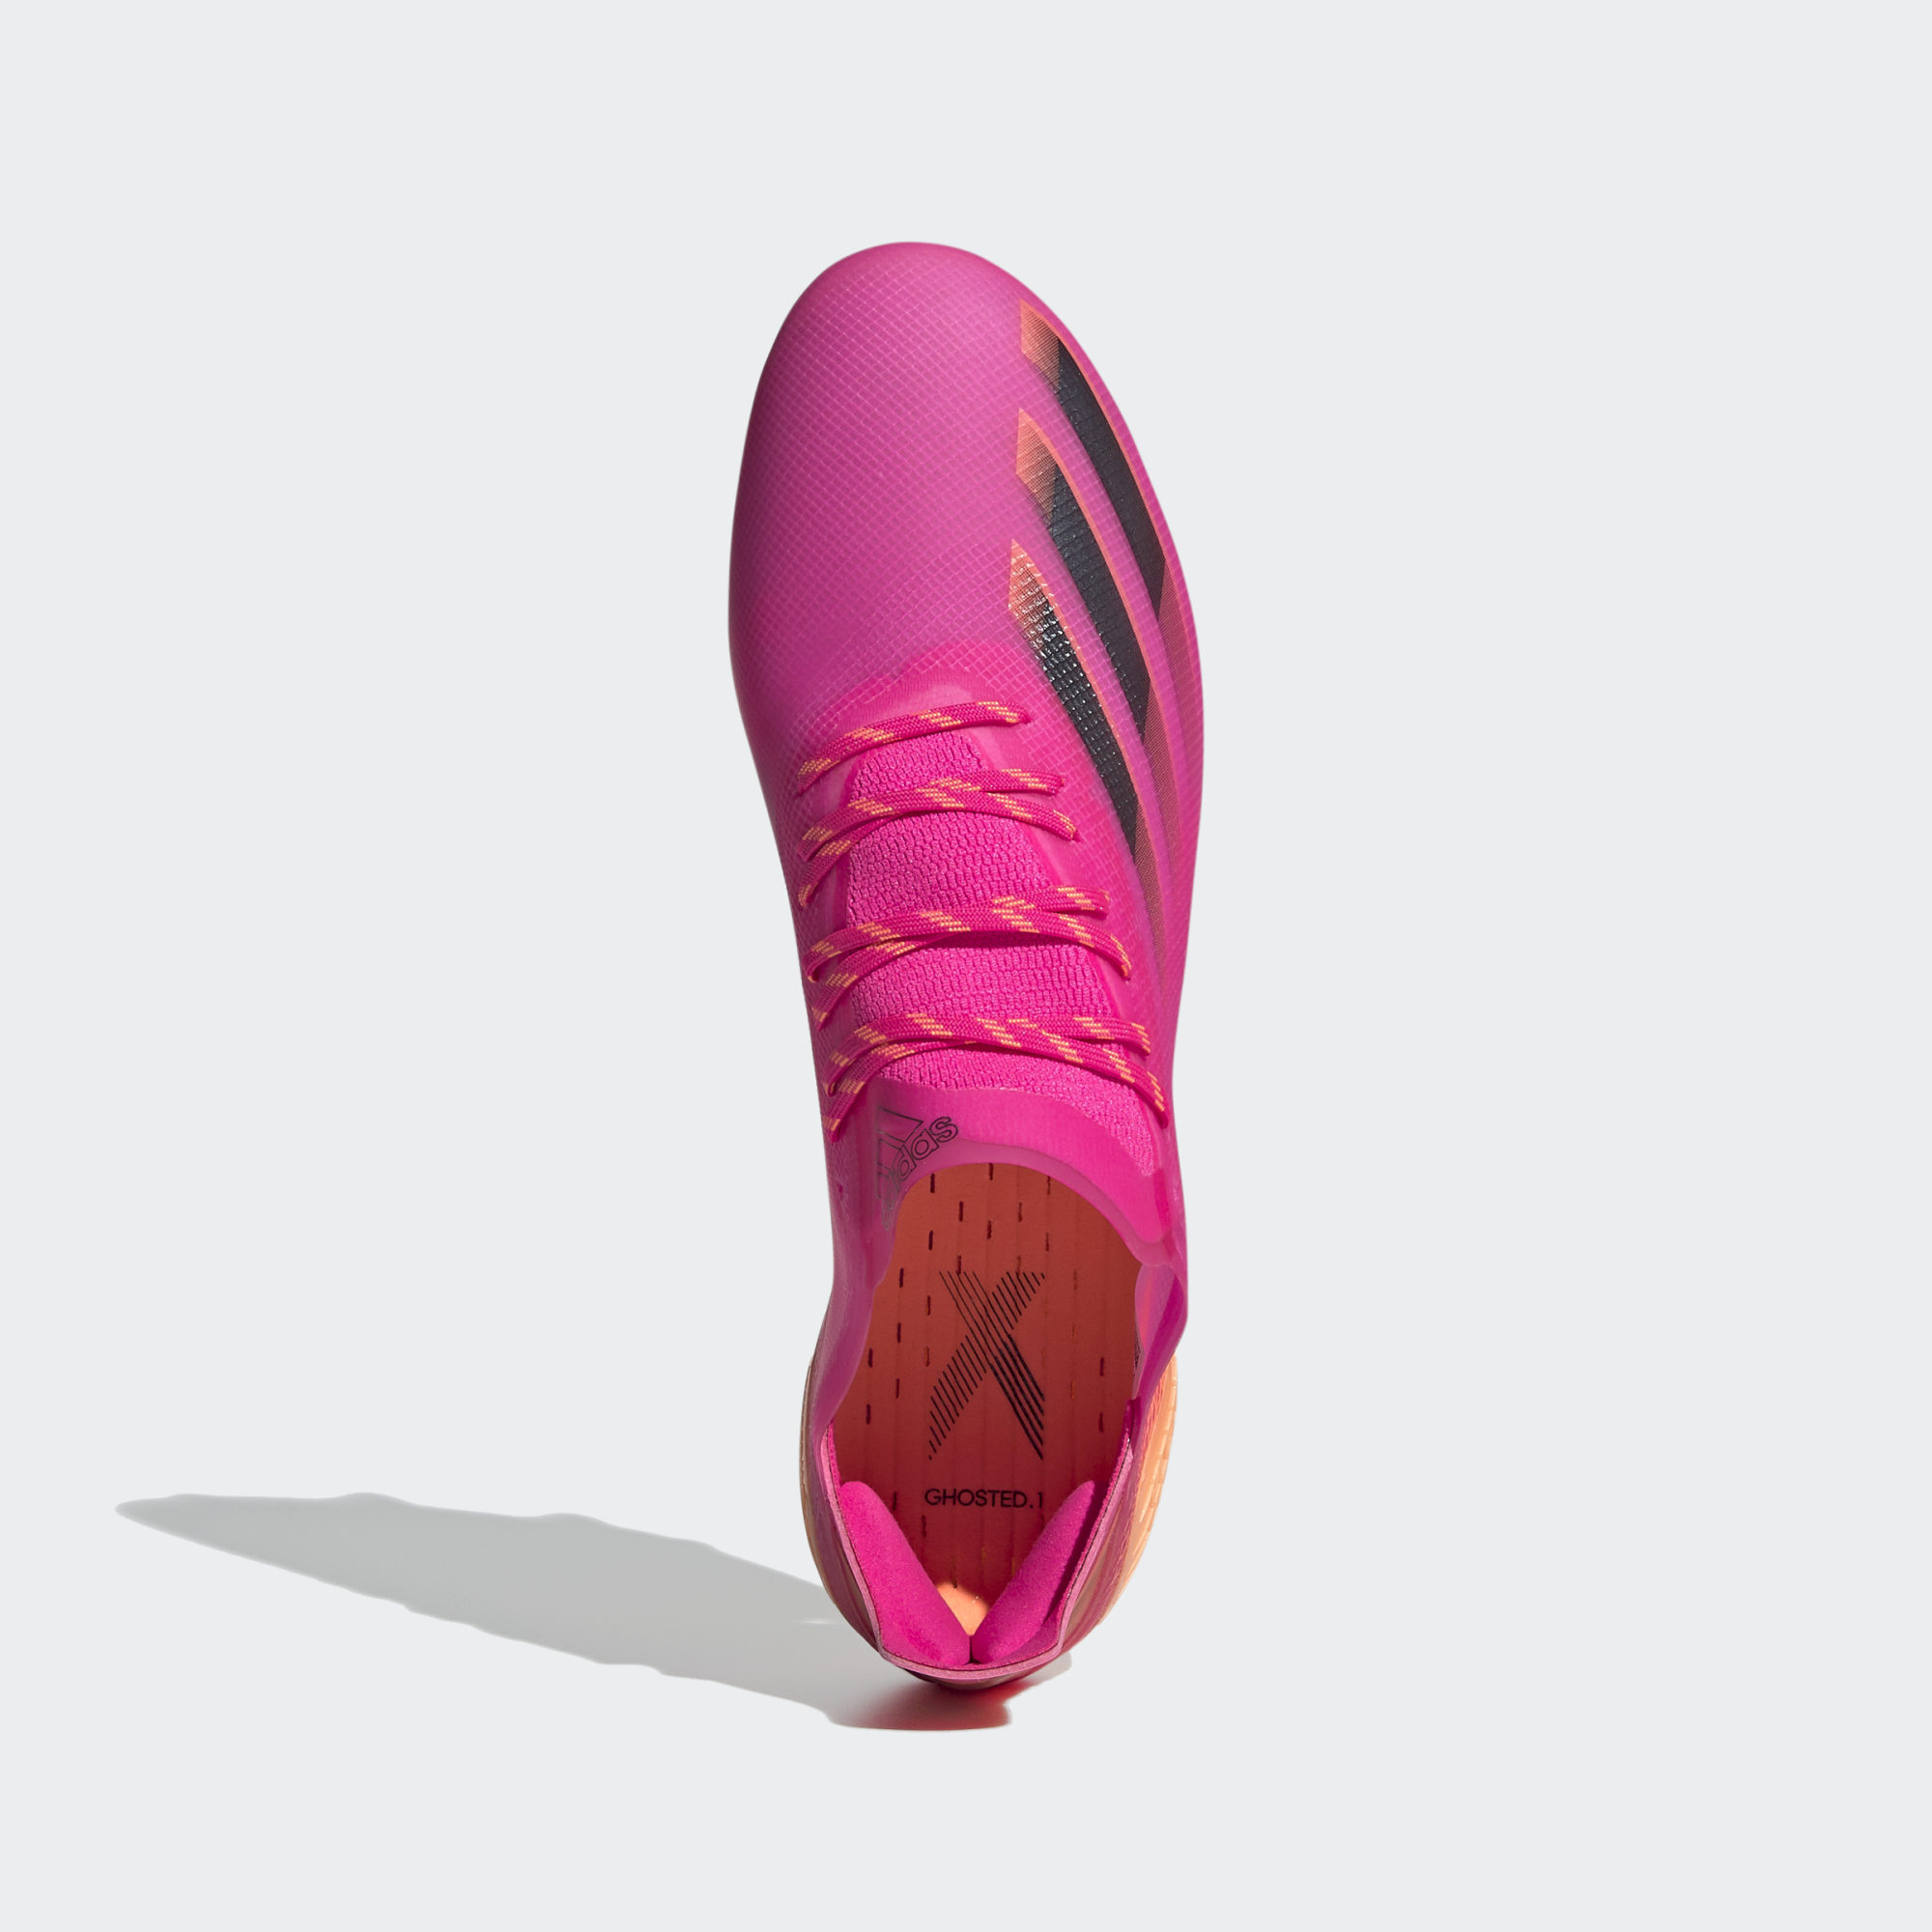 ADIDAS PERFORMANCE Fußballschuh X Ghosted.1 SG in Pink 